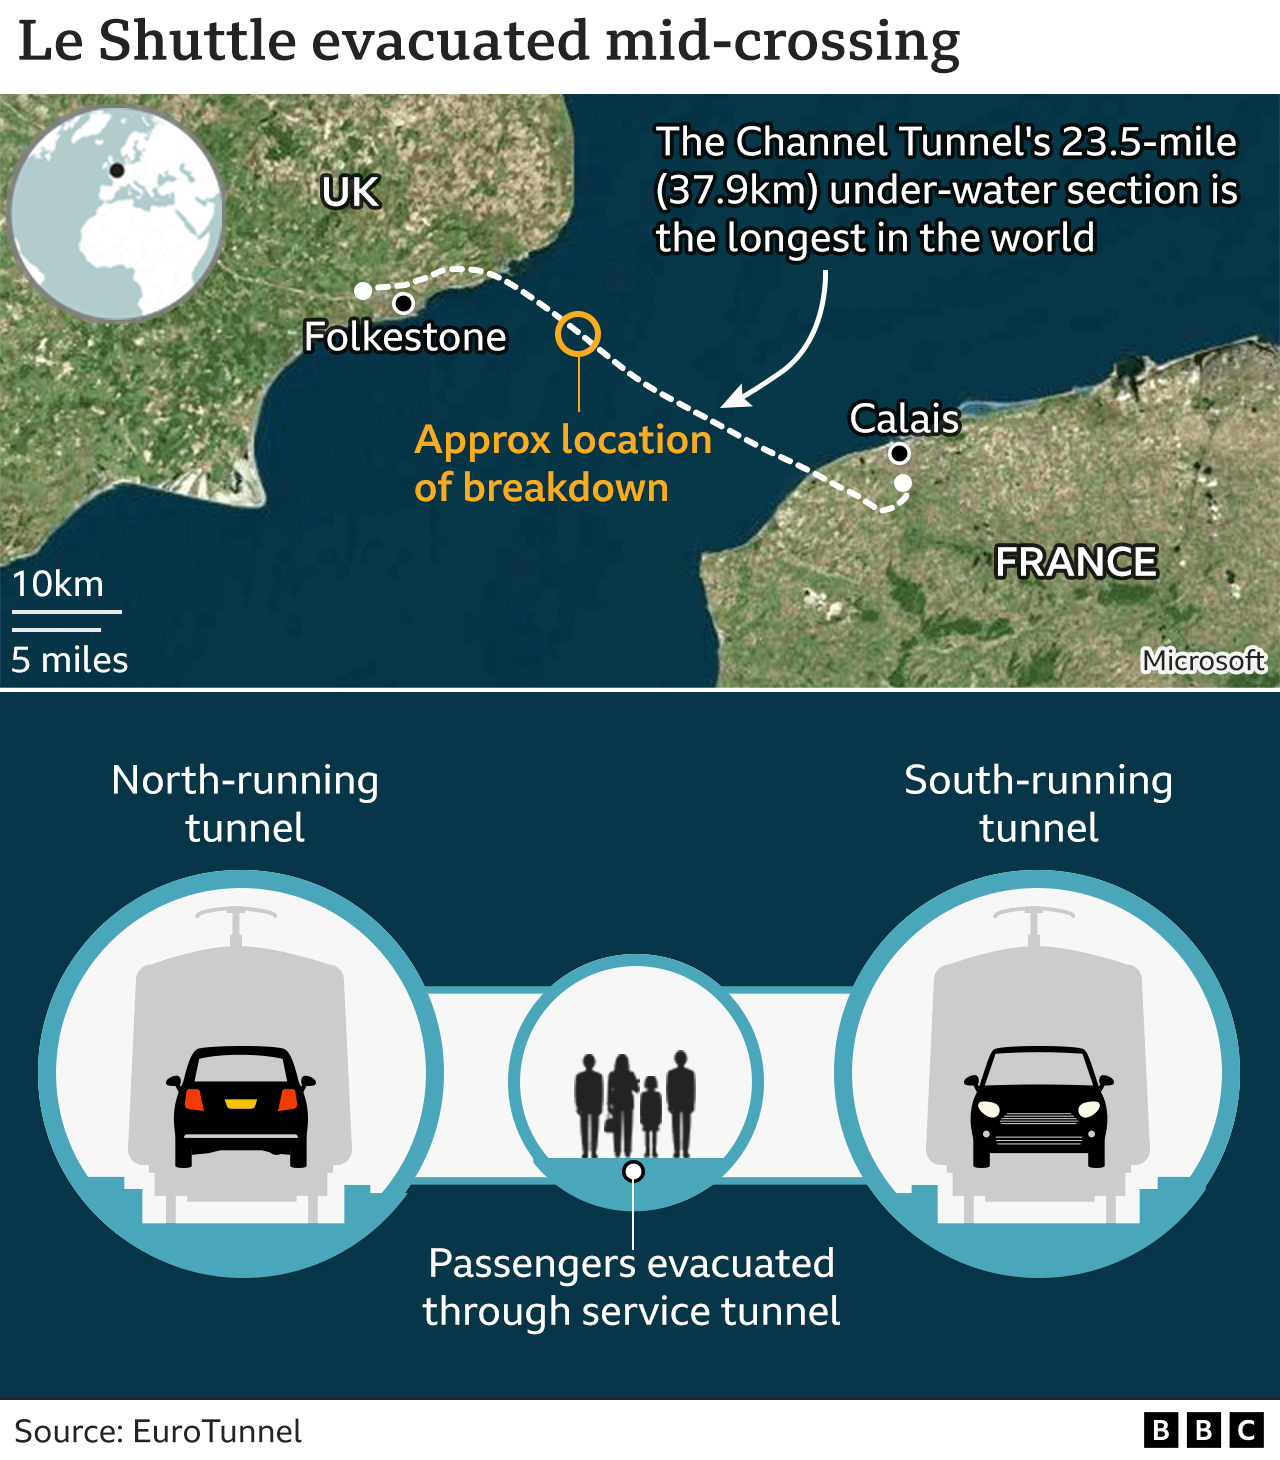 Map showing the Channel Tunnel, breakdown location and the three tunnels running under-sea